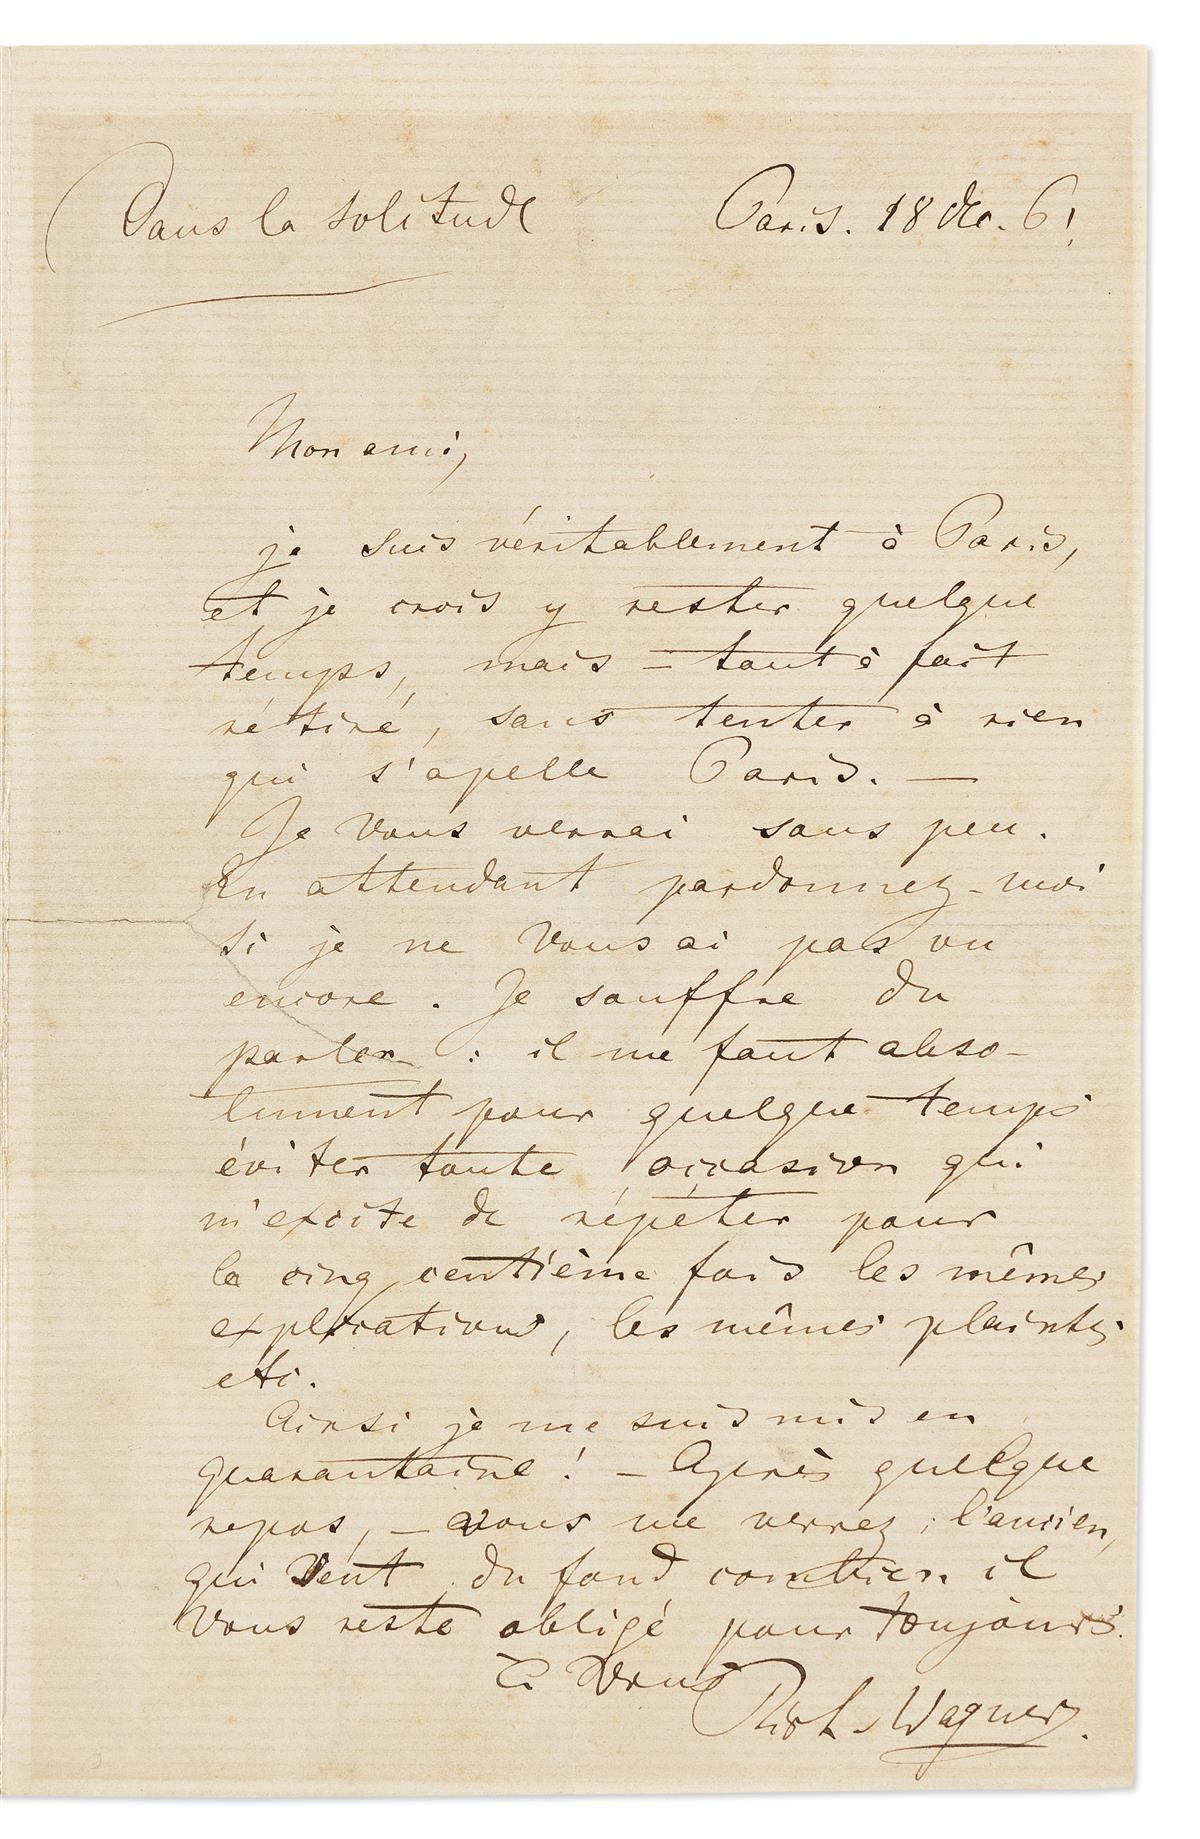 WAGNER, RICHARD. Autograph Letter Signed, Rich. Wagner, to My friend, in French,